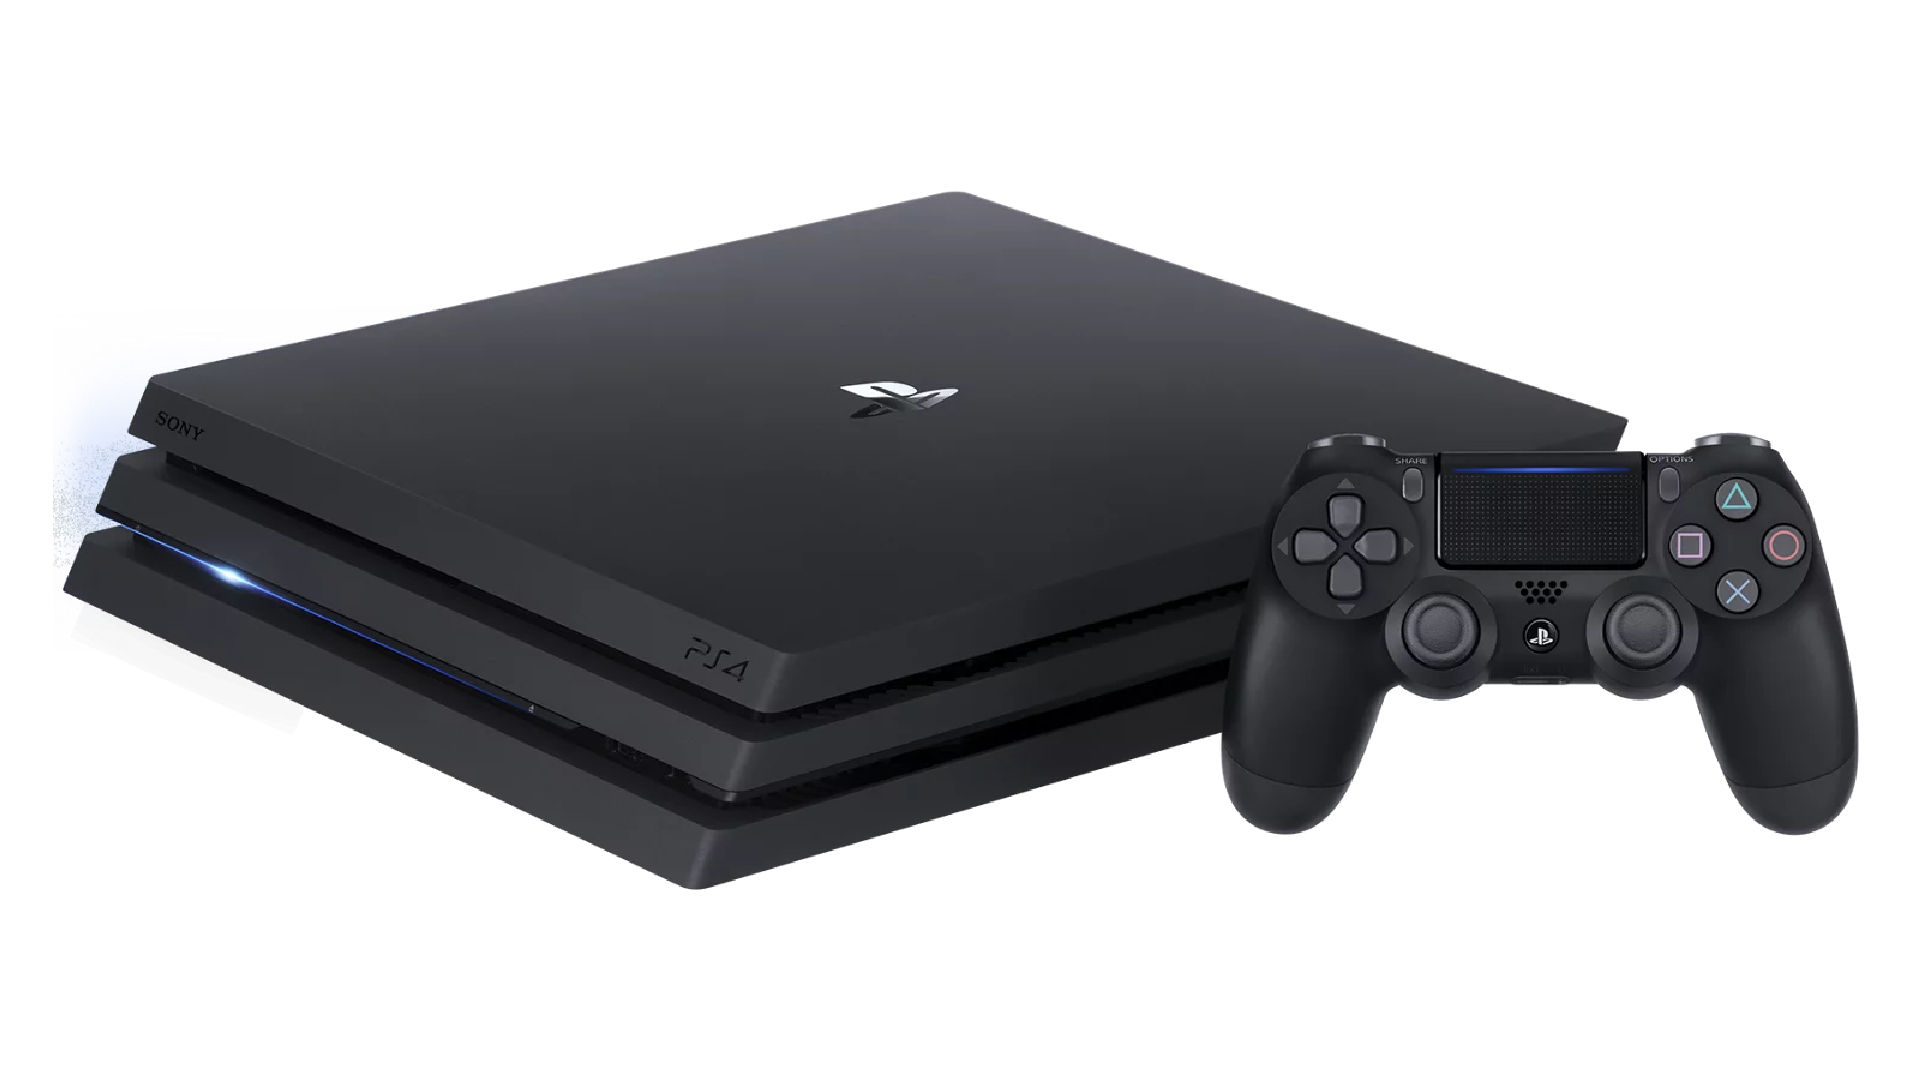 Radical Sony PlayStation 5 Pro redesign appears with the PS5 Slim